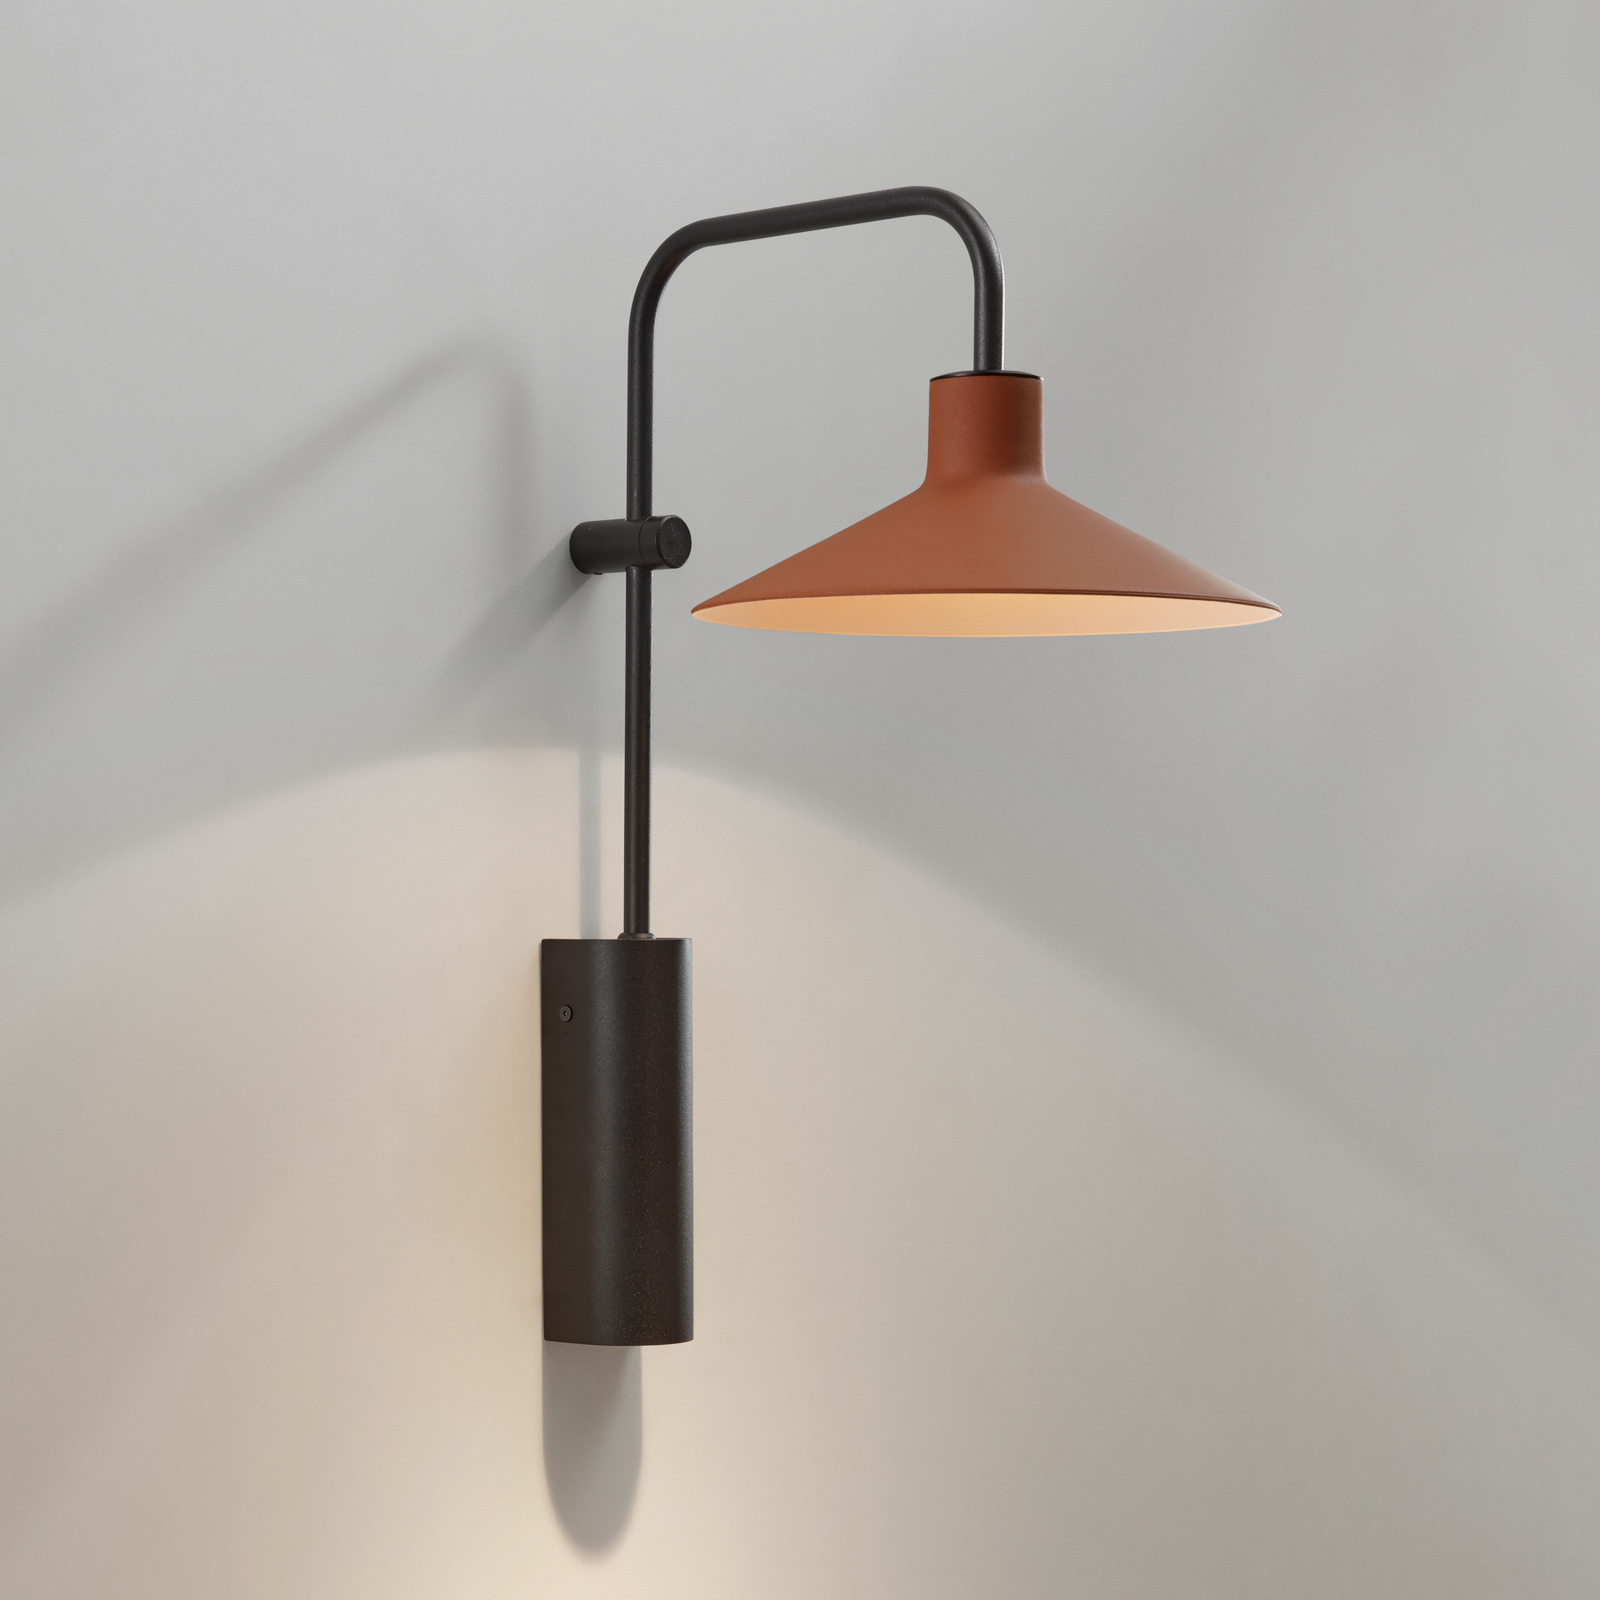 Bover Platet A02 wall lamp E14 switch terracotta